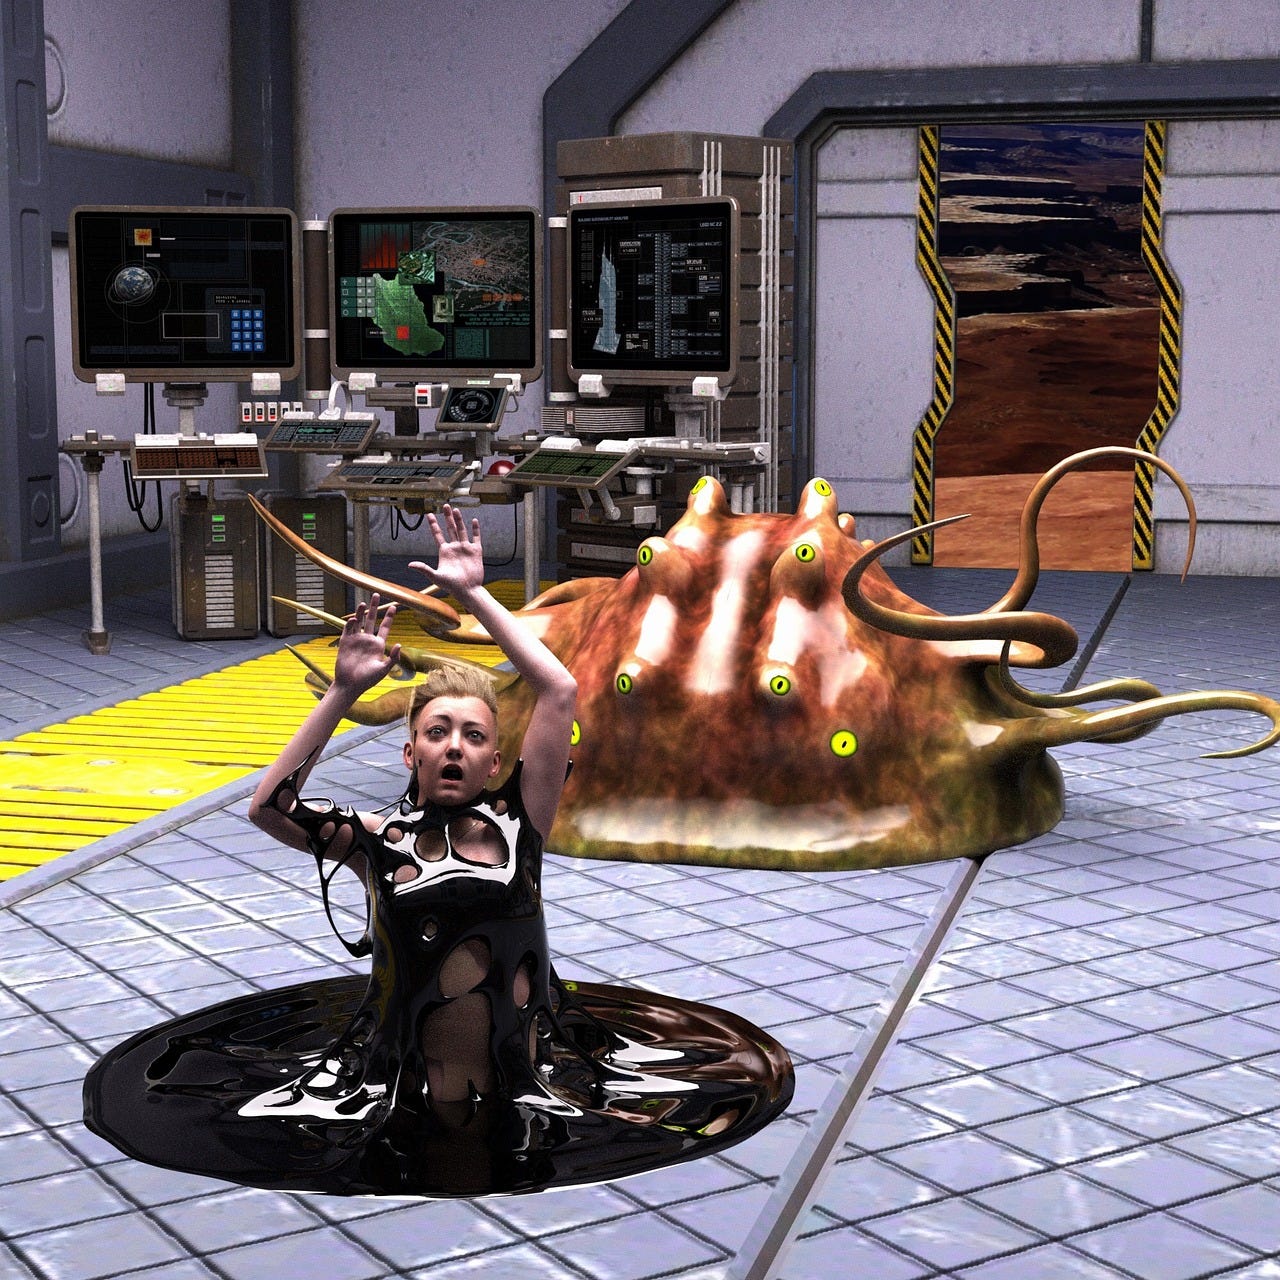 A CGI image of a tentacled alien and a melting cyborg girl in front of a computer databank on a ship or facility on an alien planet.